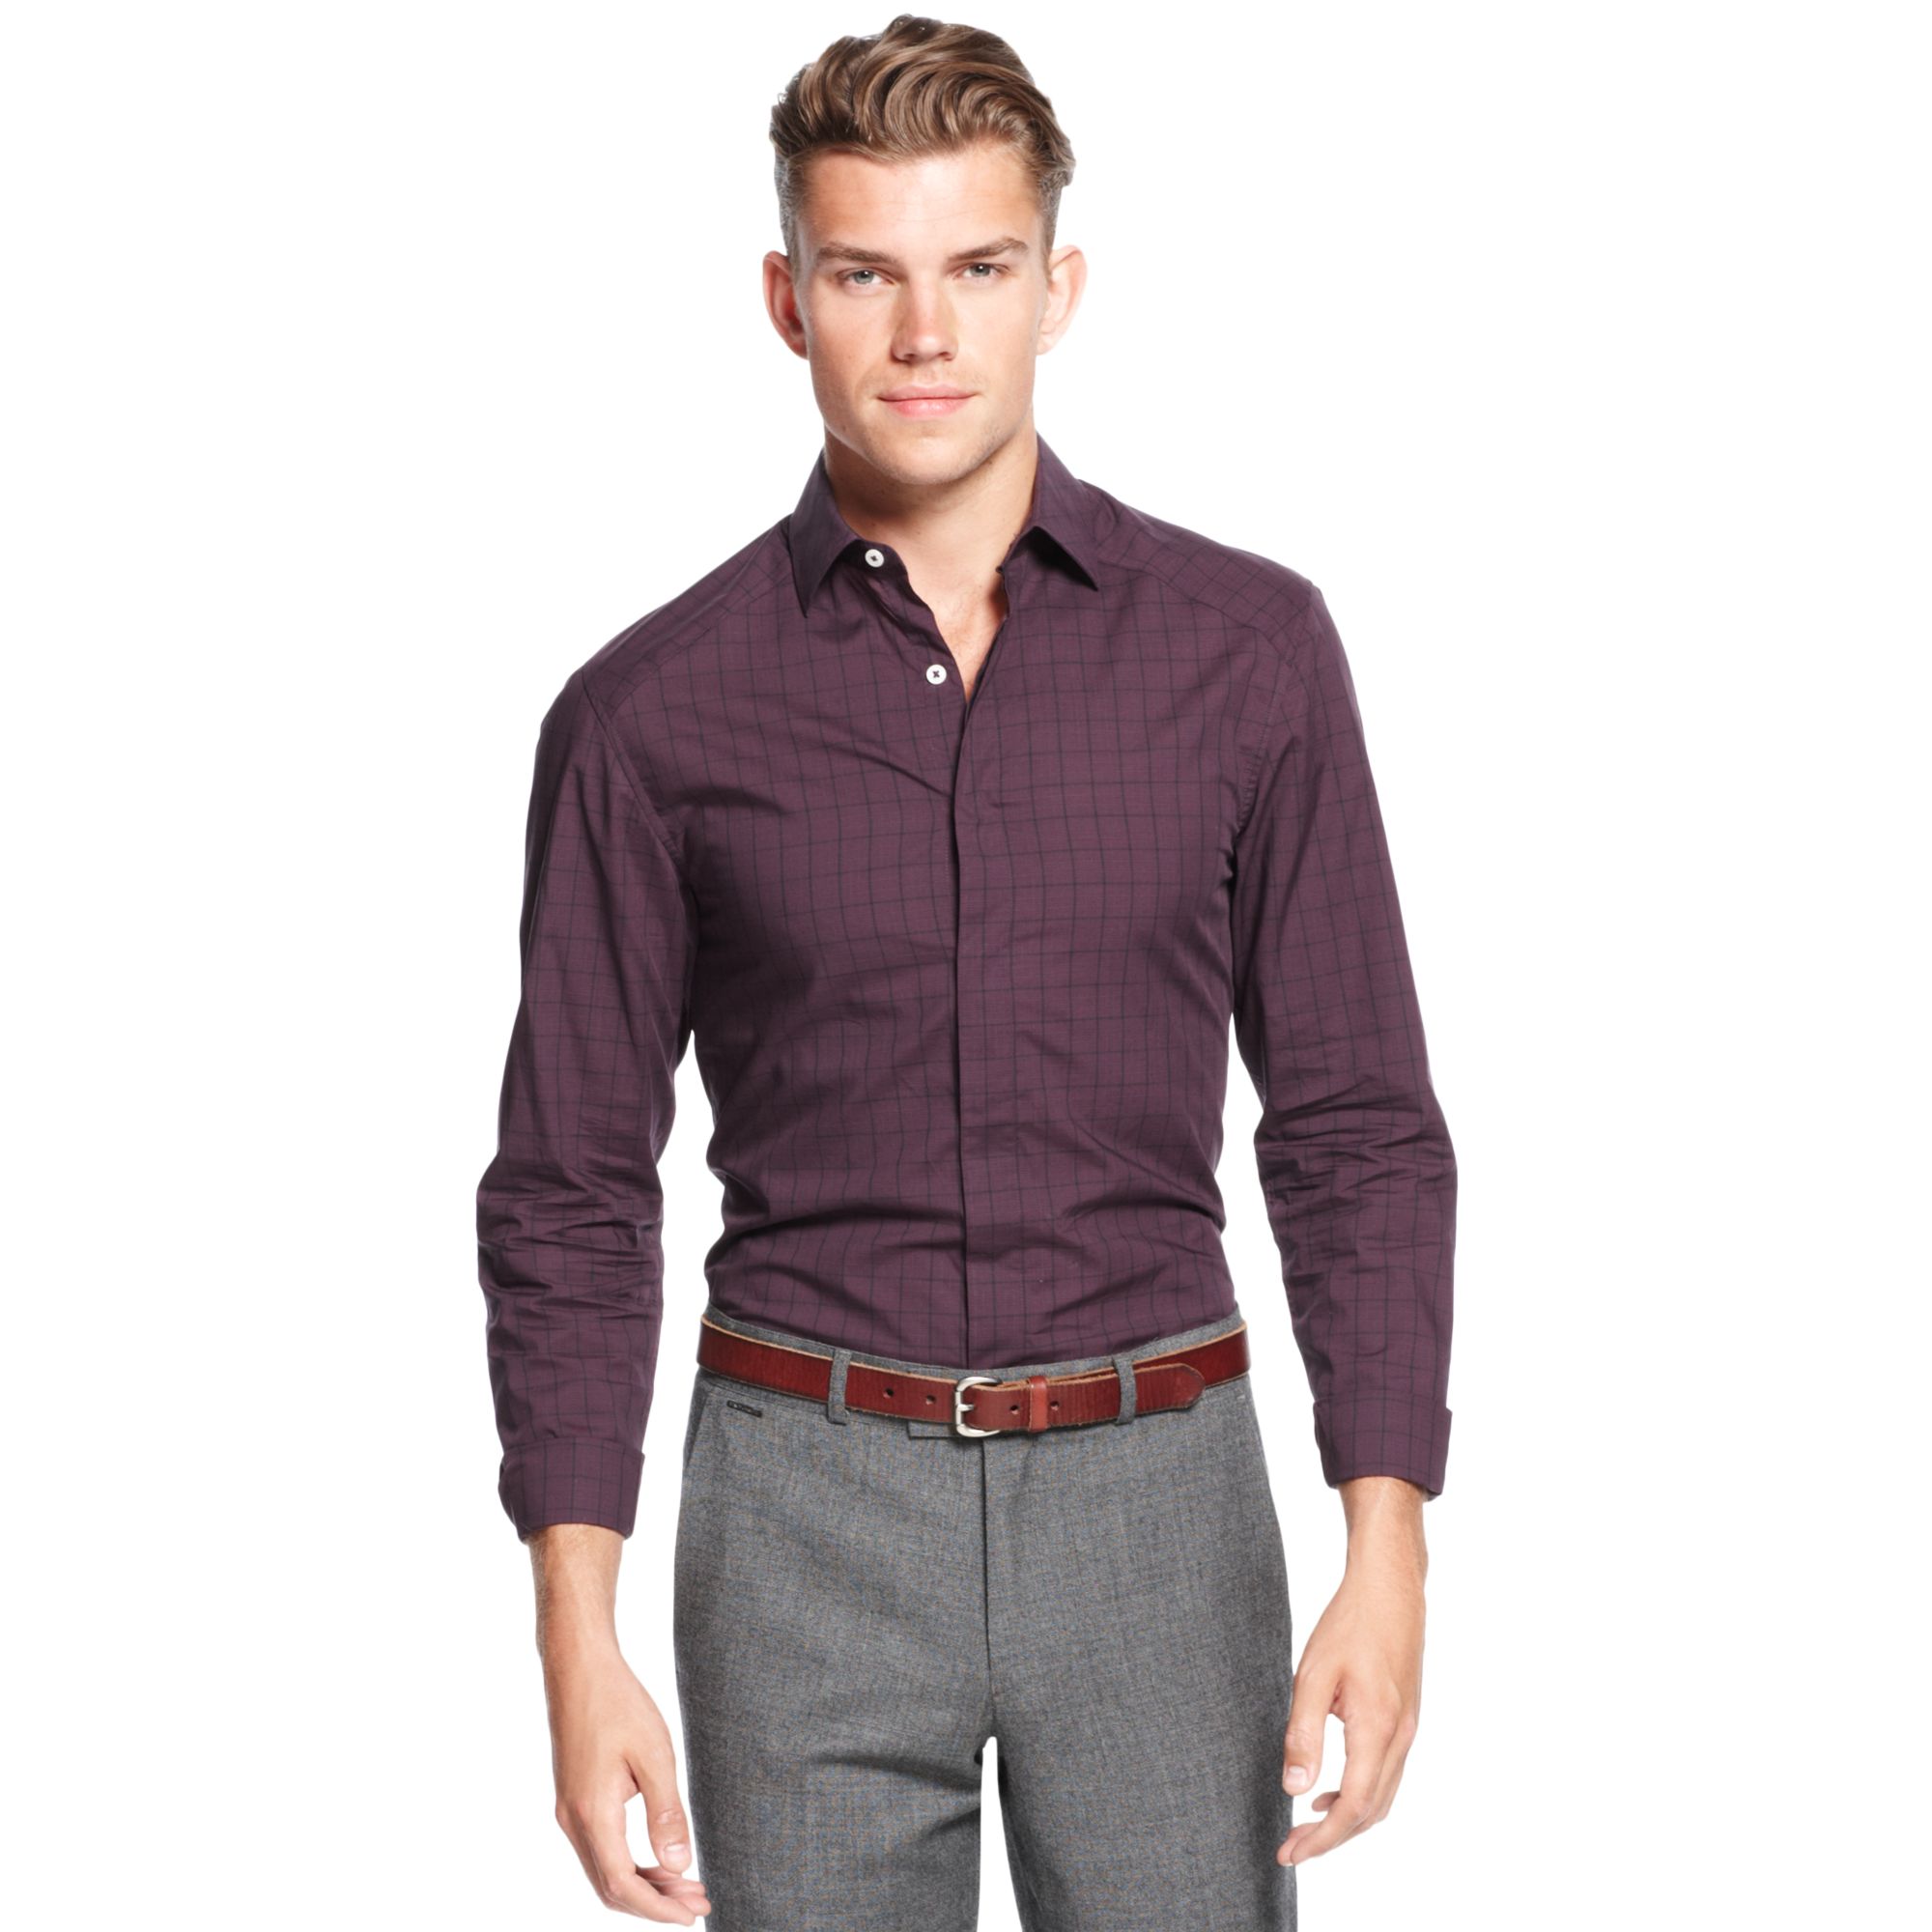 Lyst - Vince Camuto Long Sleeve Covered Placket Shirt in Purple for Men